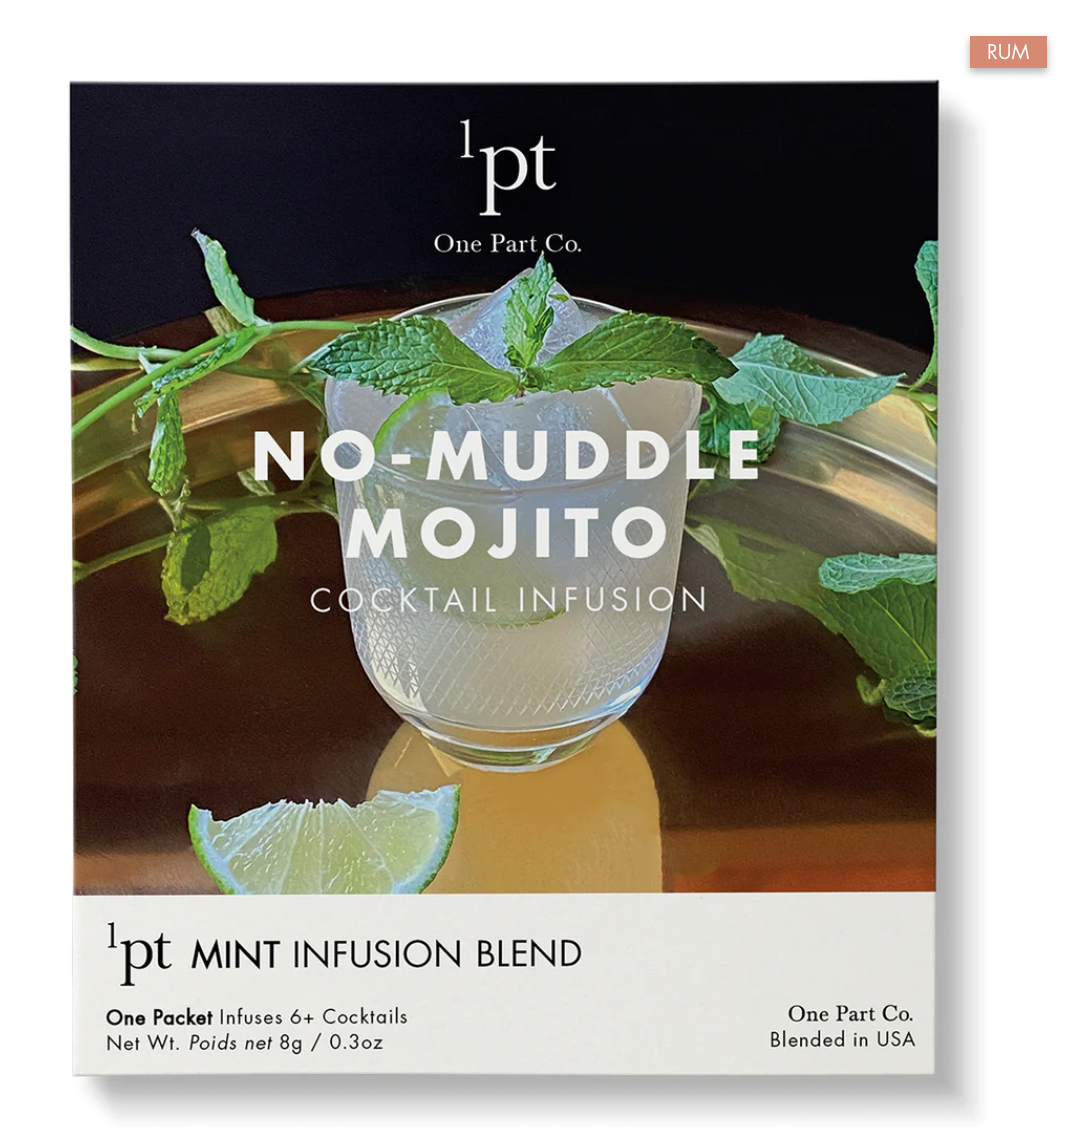 1pt One Part Co. No-Muddle Mojito Cocktail/Mocktail Infusion